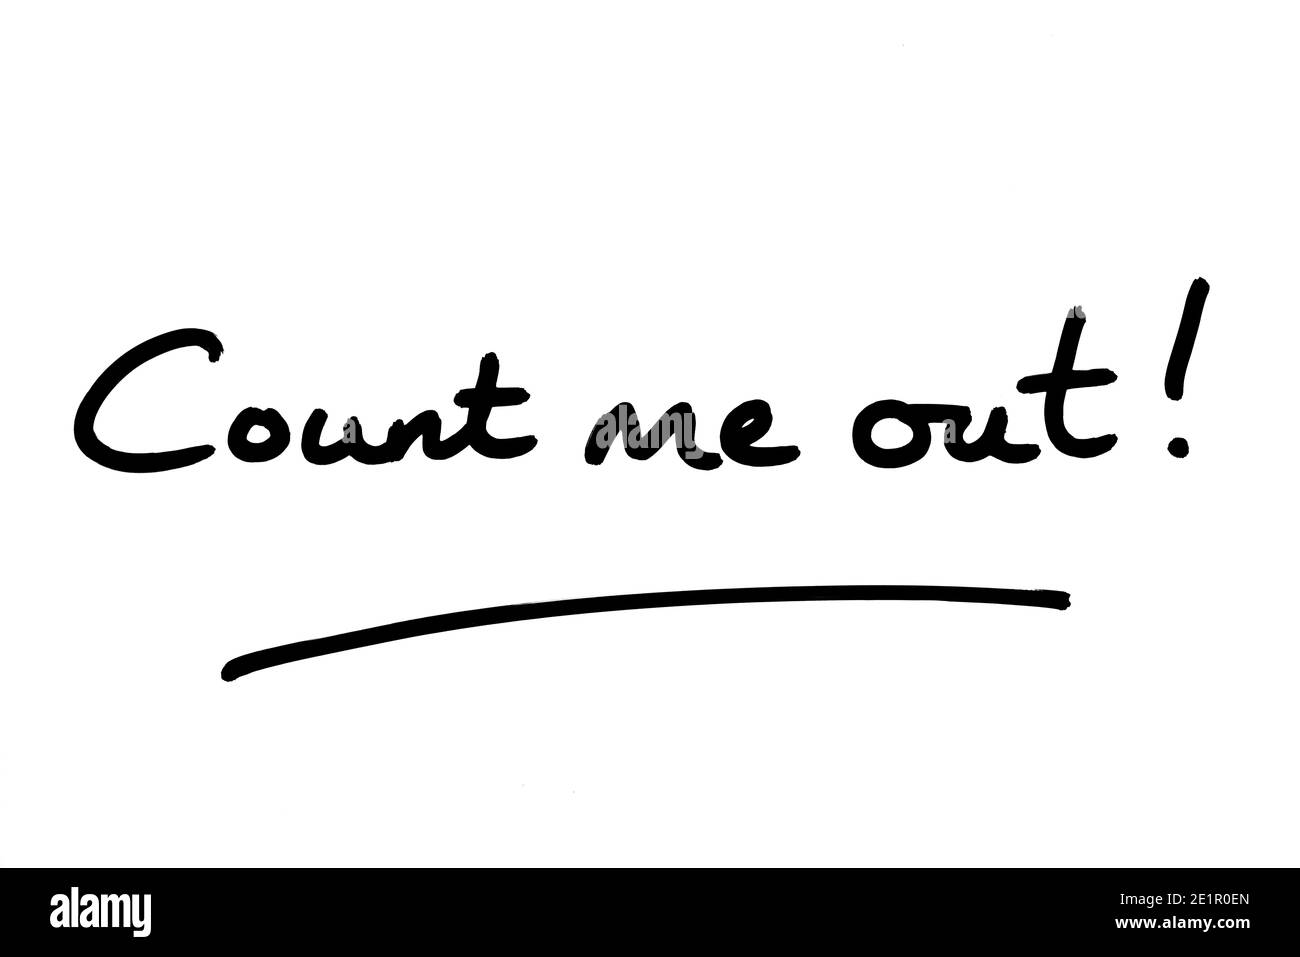 Count me out! handwritten on a white background. Stock Photo